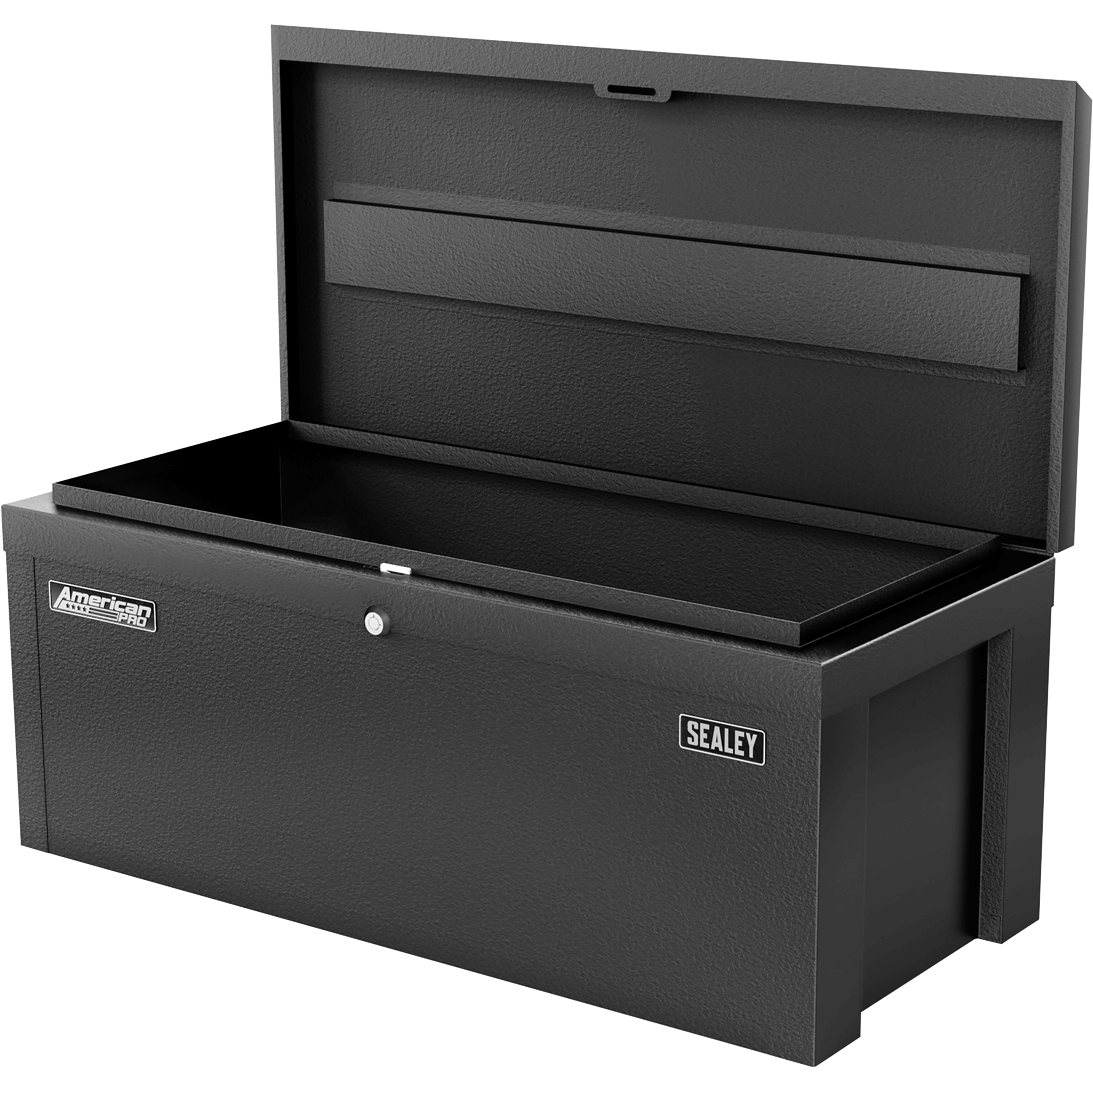 Sealey American Pro Metal Tool Storage Chest 765mm 350mm 320mm